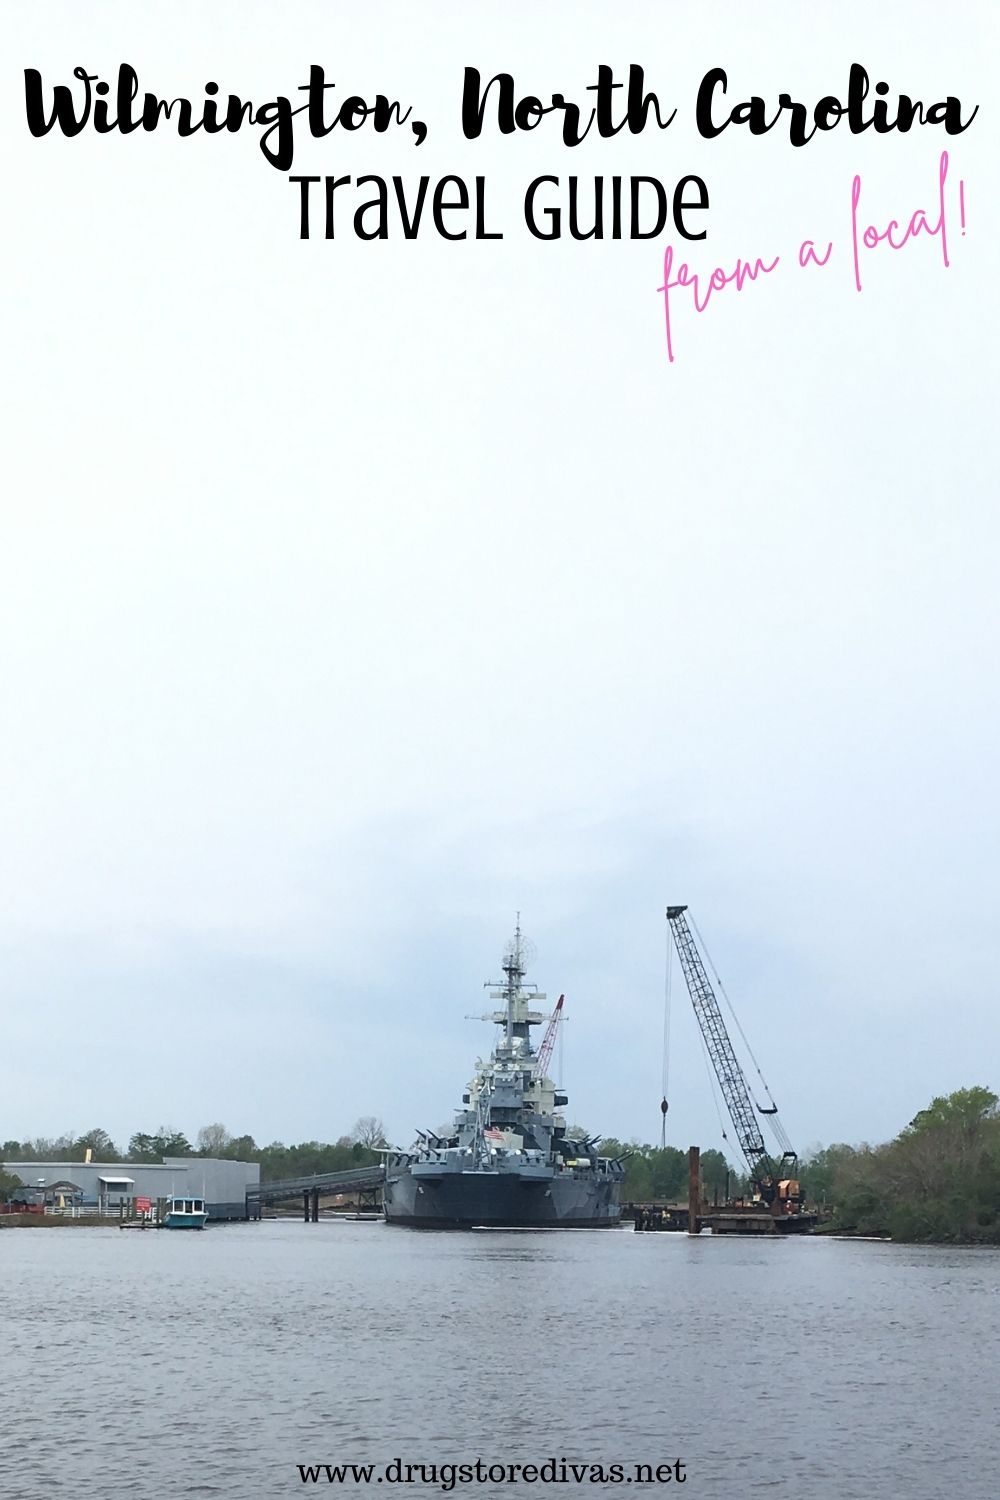 The Battleship North Carolina on the Cape Fear River with the words 